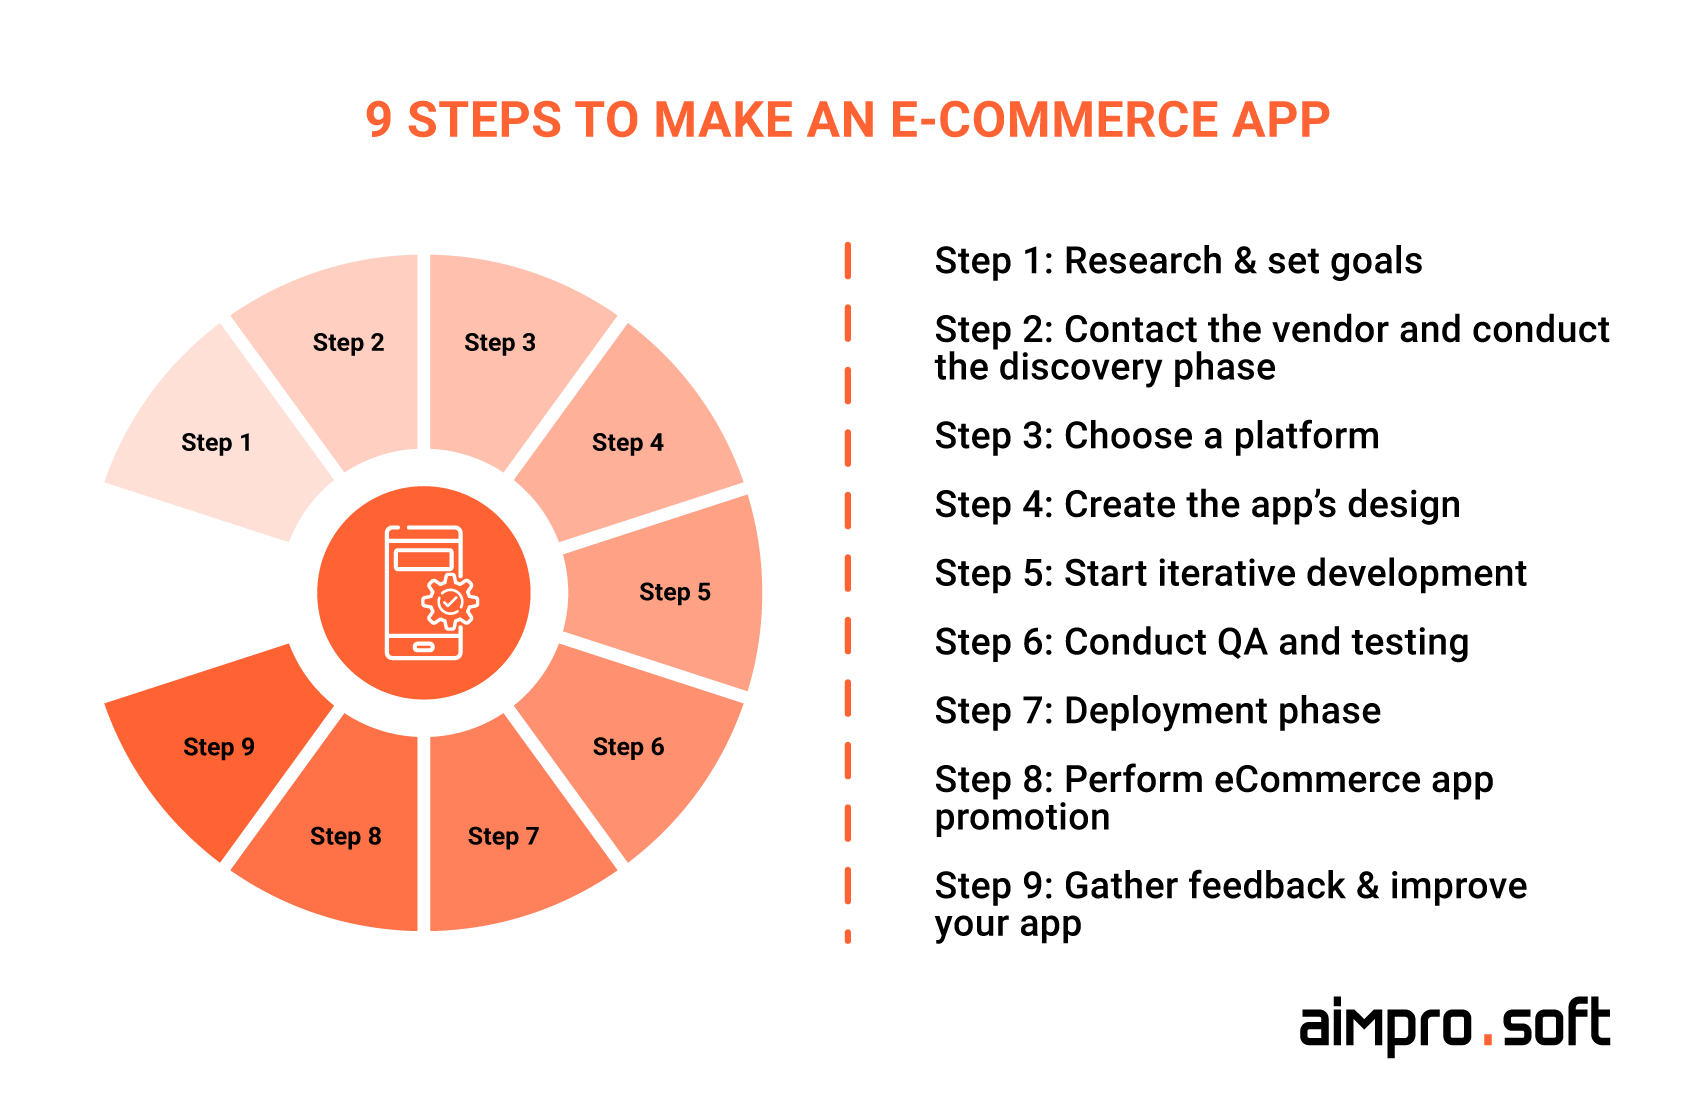 Guide to developing an m-commerce app